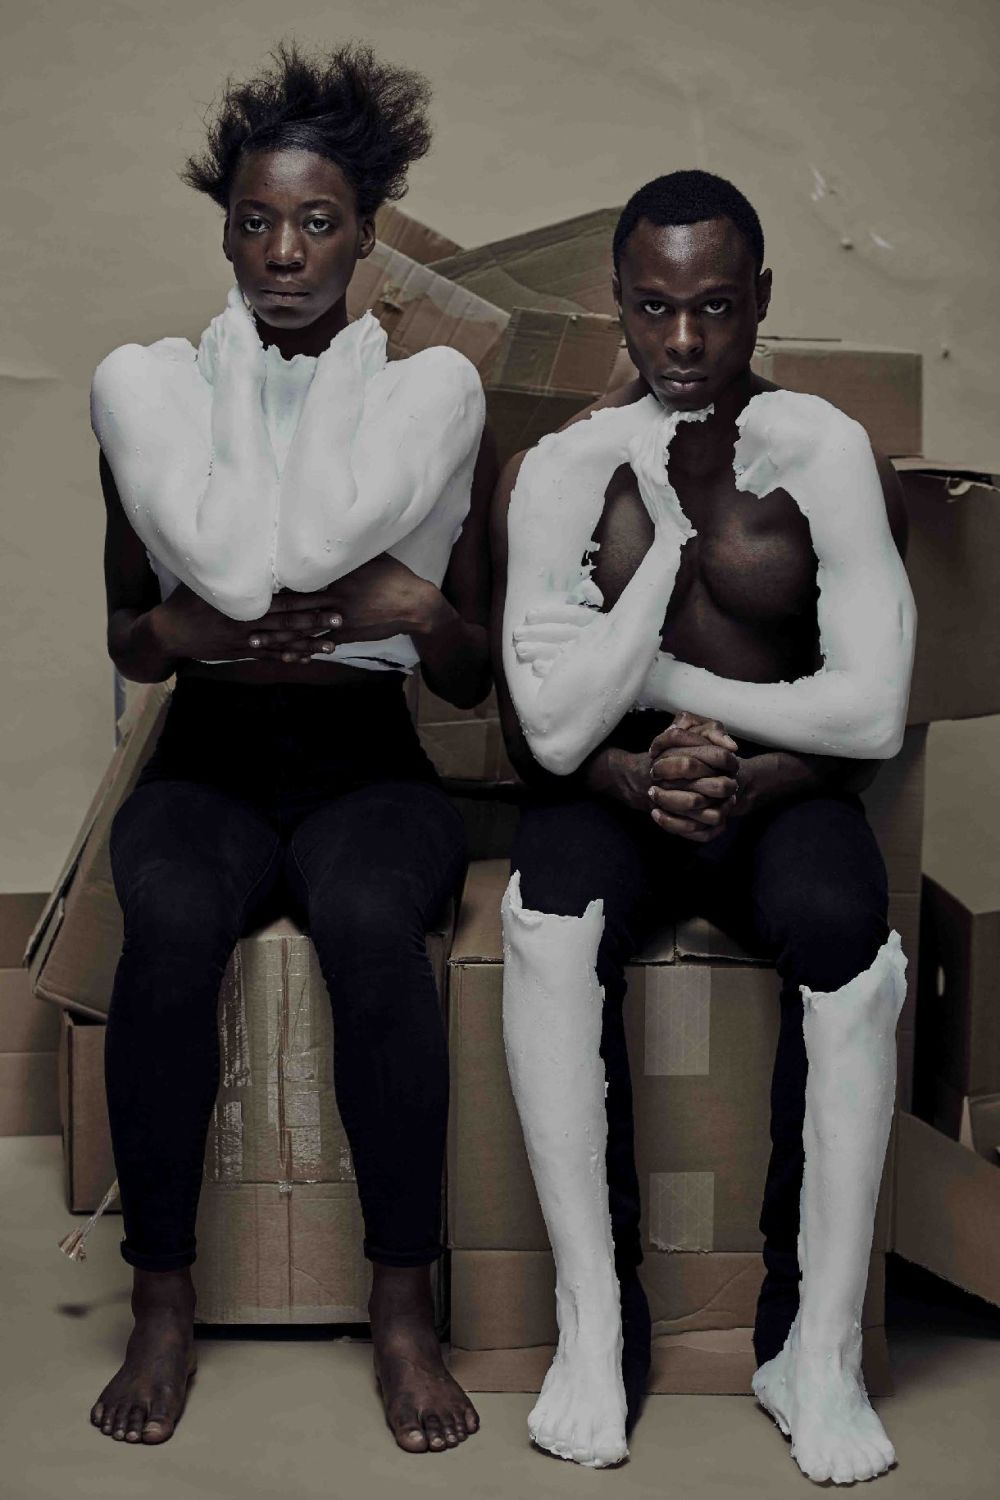 Two models sit on cardboard boxes while wearing plaster-cast items.